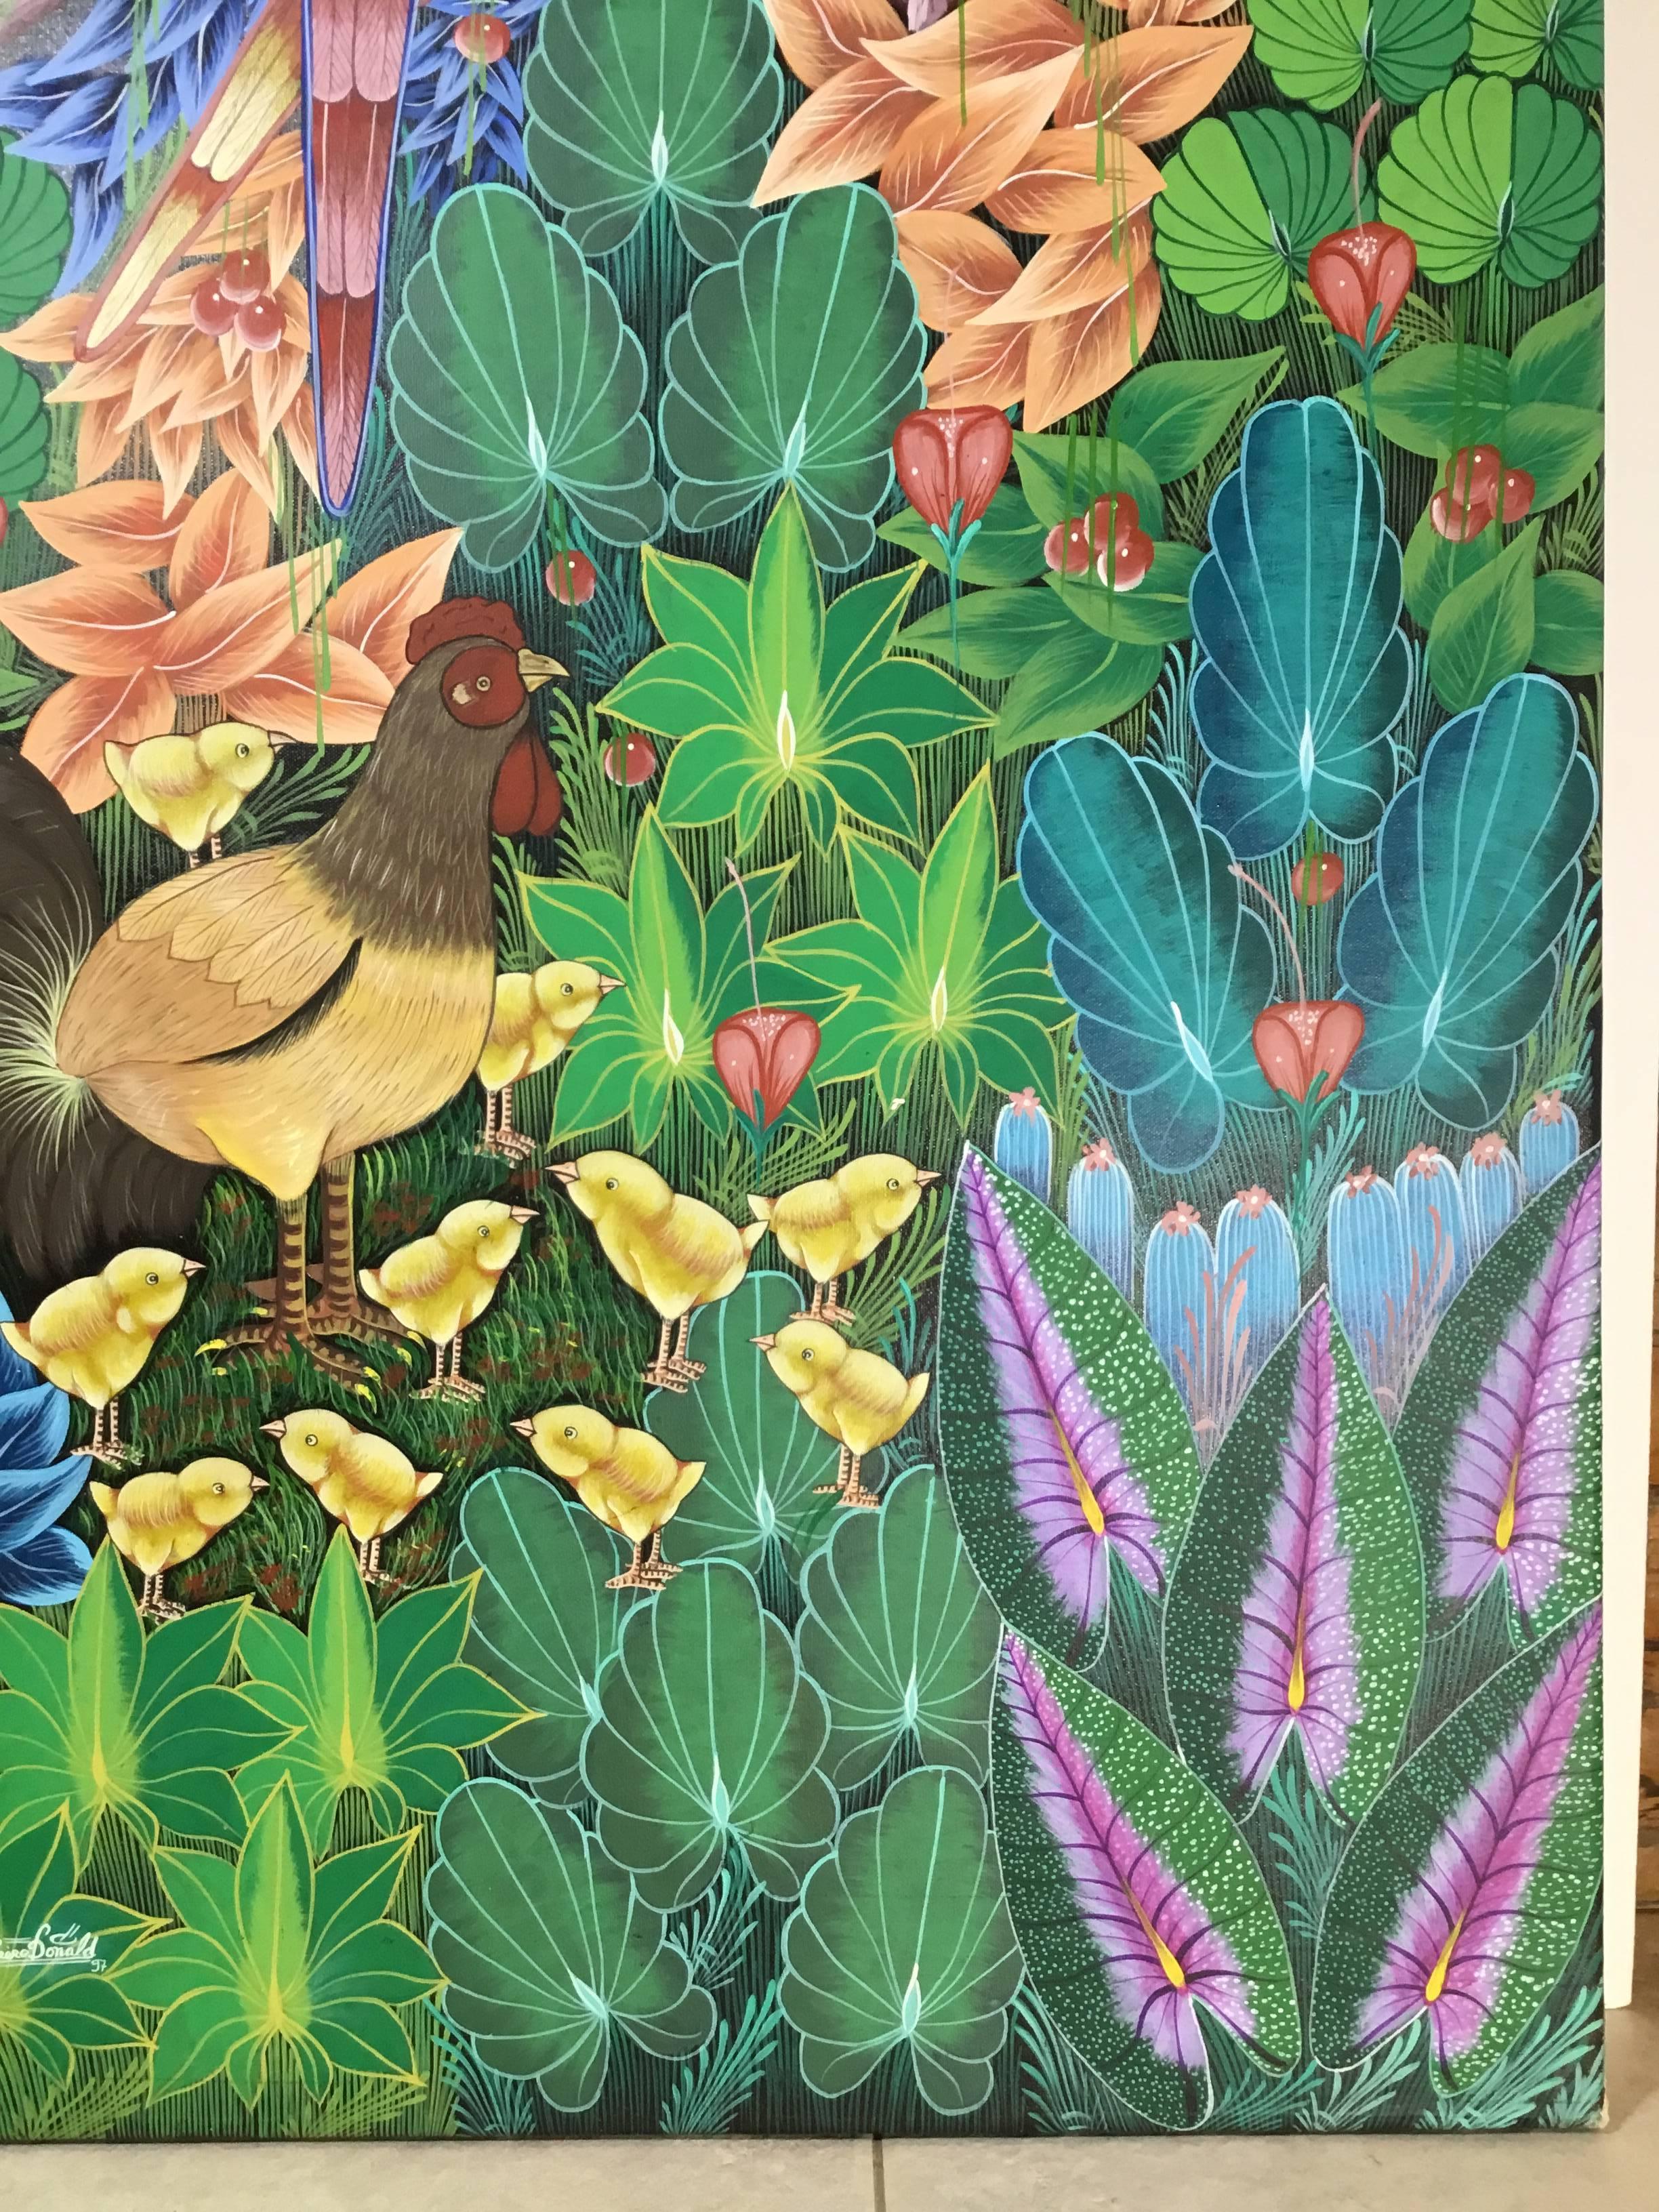 Beautiful oil painting on canvas depicting lush colorful jungle scene with parrots, chicken and chicks all surrounded by vines fruit and flowers. This exceptional original oil painting is signed and dated by the artist on the bottom right. Frame is